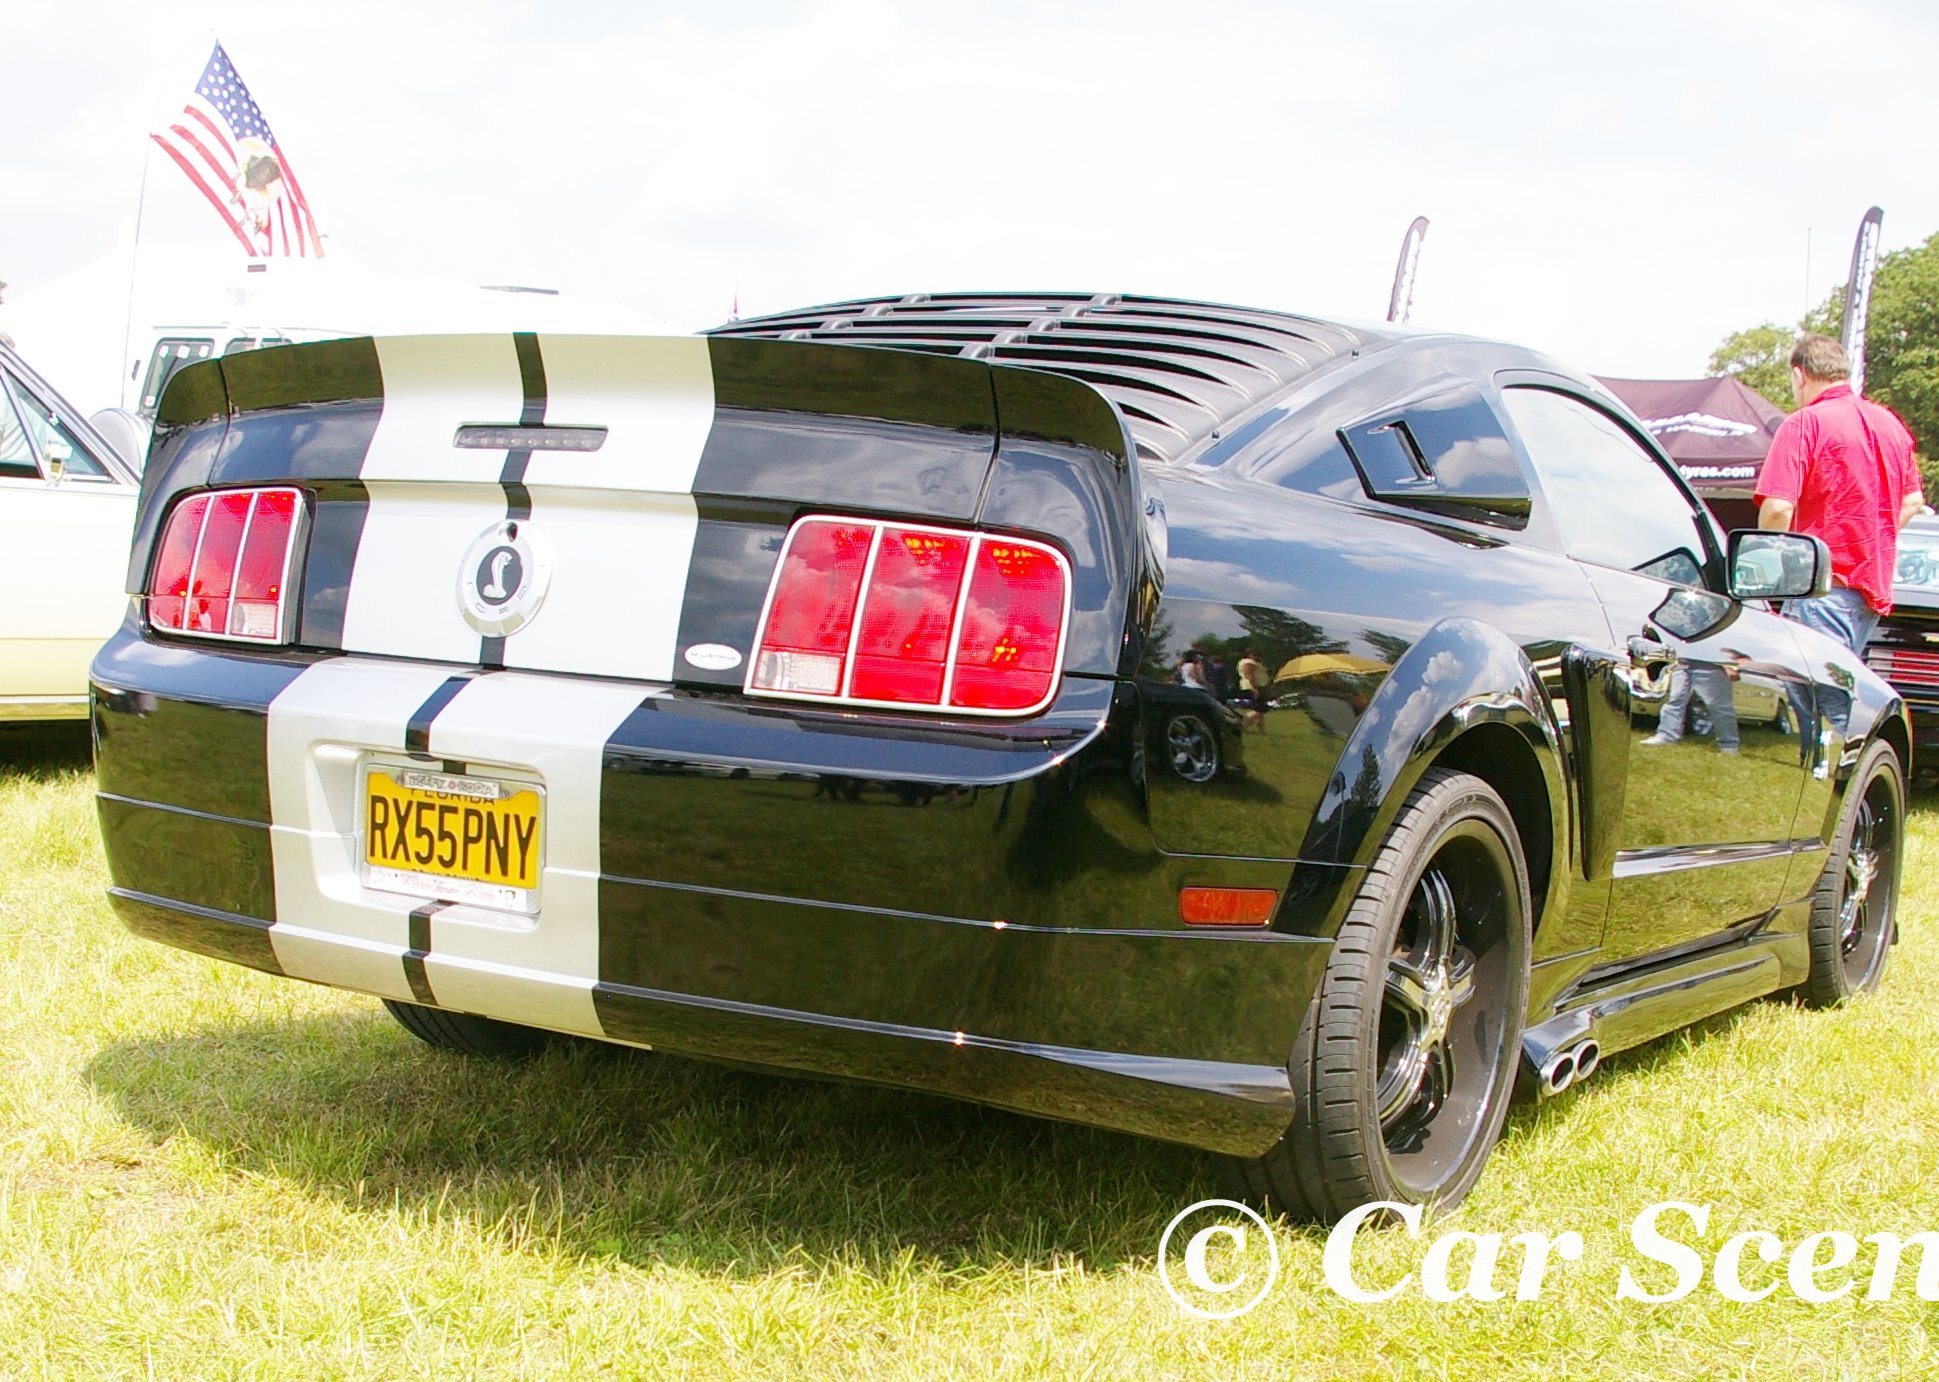 2005 Ford Mustang Shelby Cobra rear view